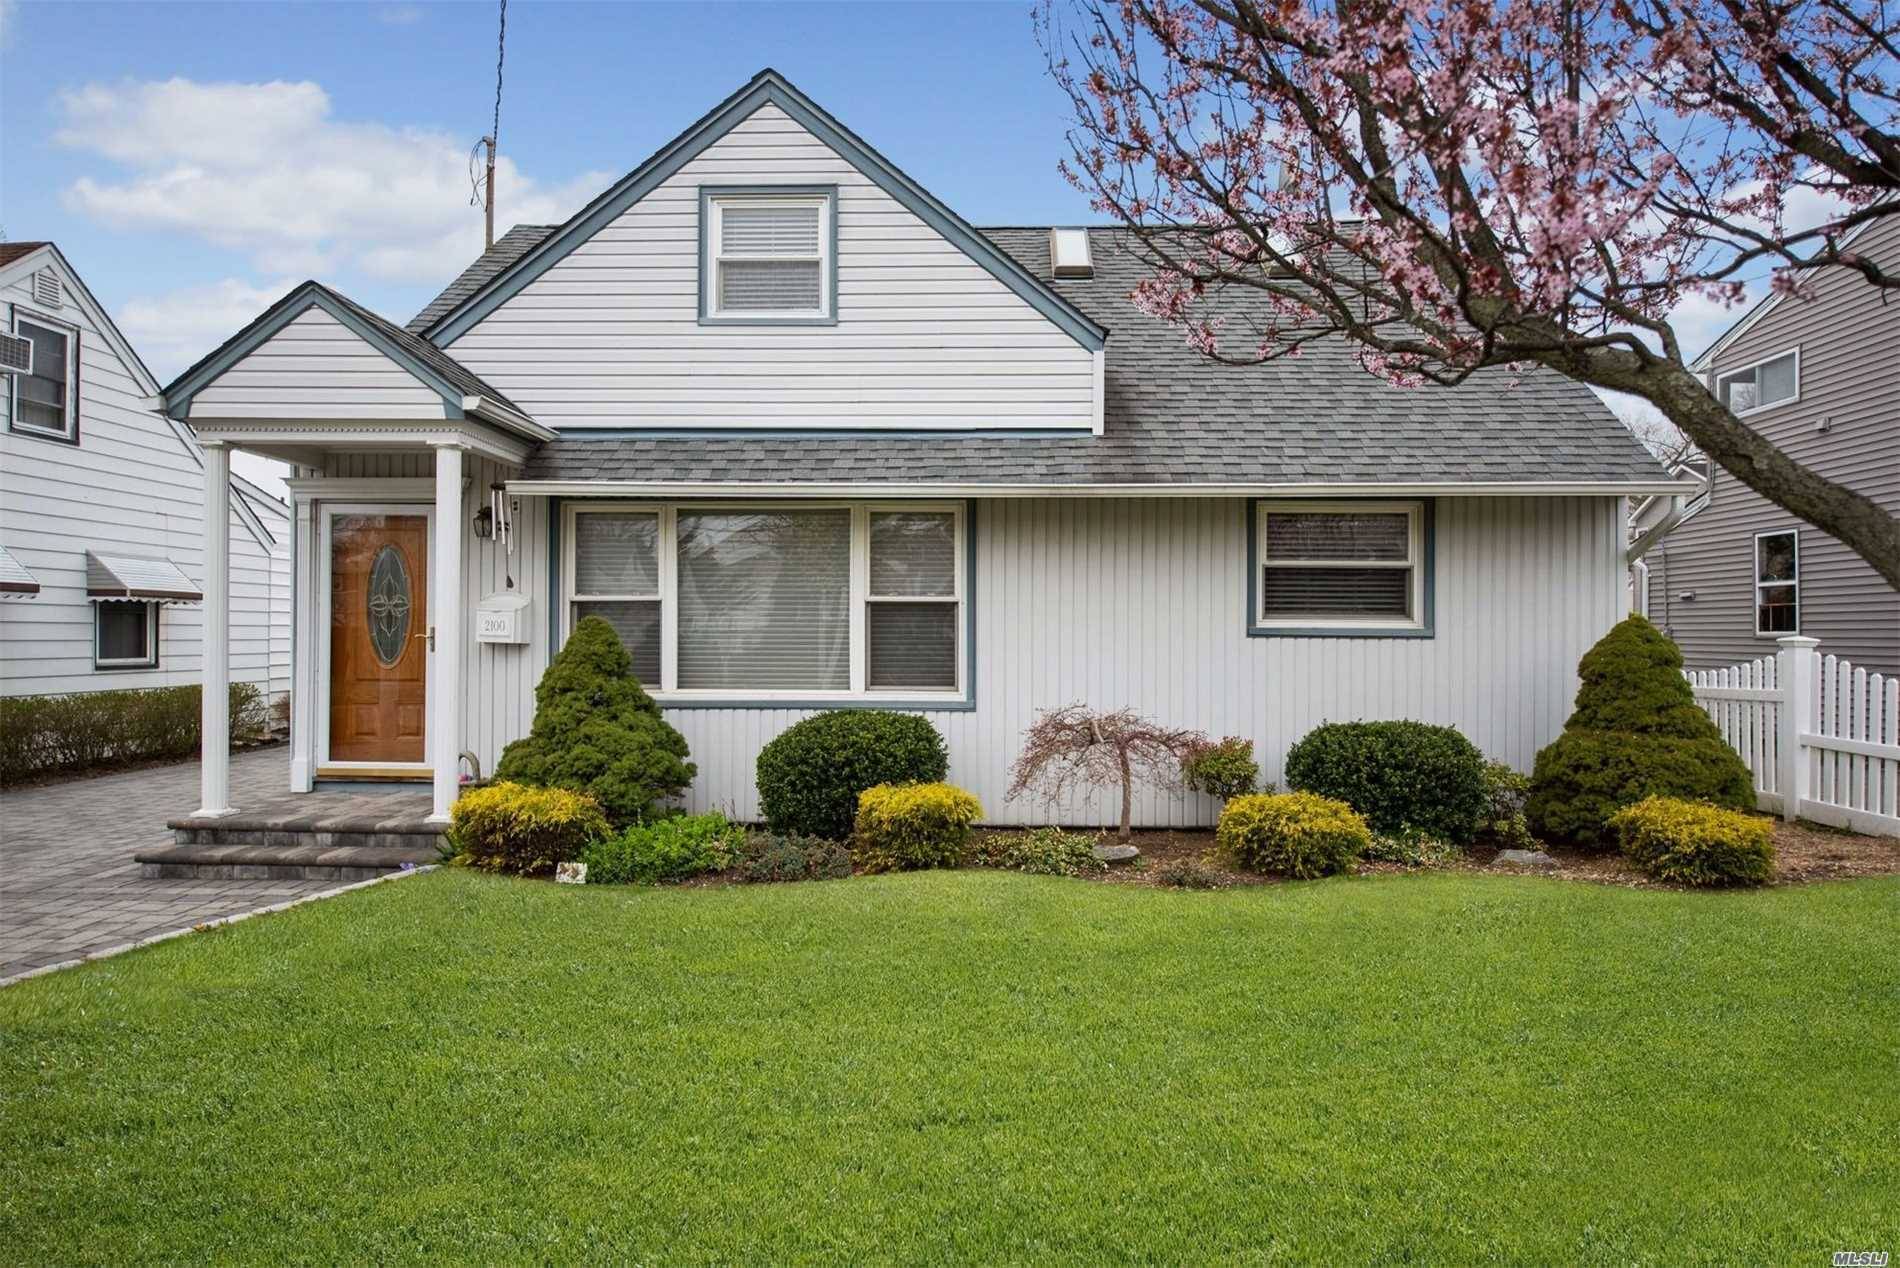 mint condition, and all quality workmanship, This home was featured in Newsday Article beautiful home less than 1 2 mile from Long Island Rail Road, It is located in Wantagh ...